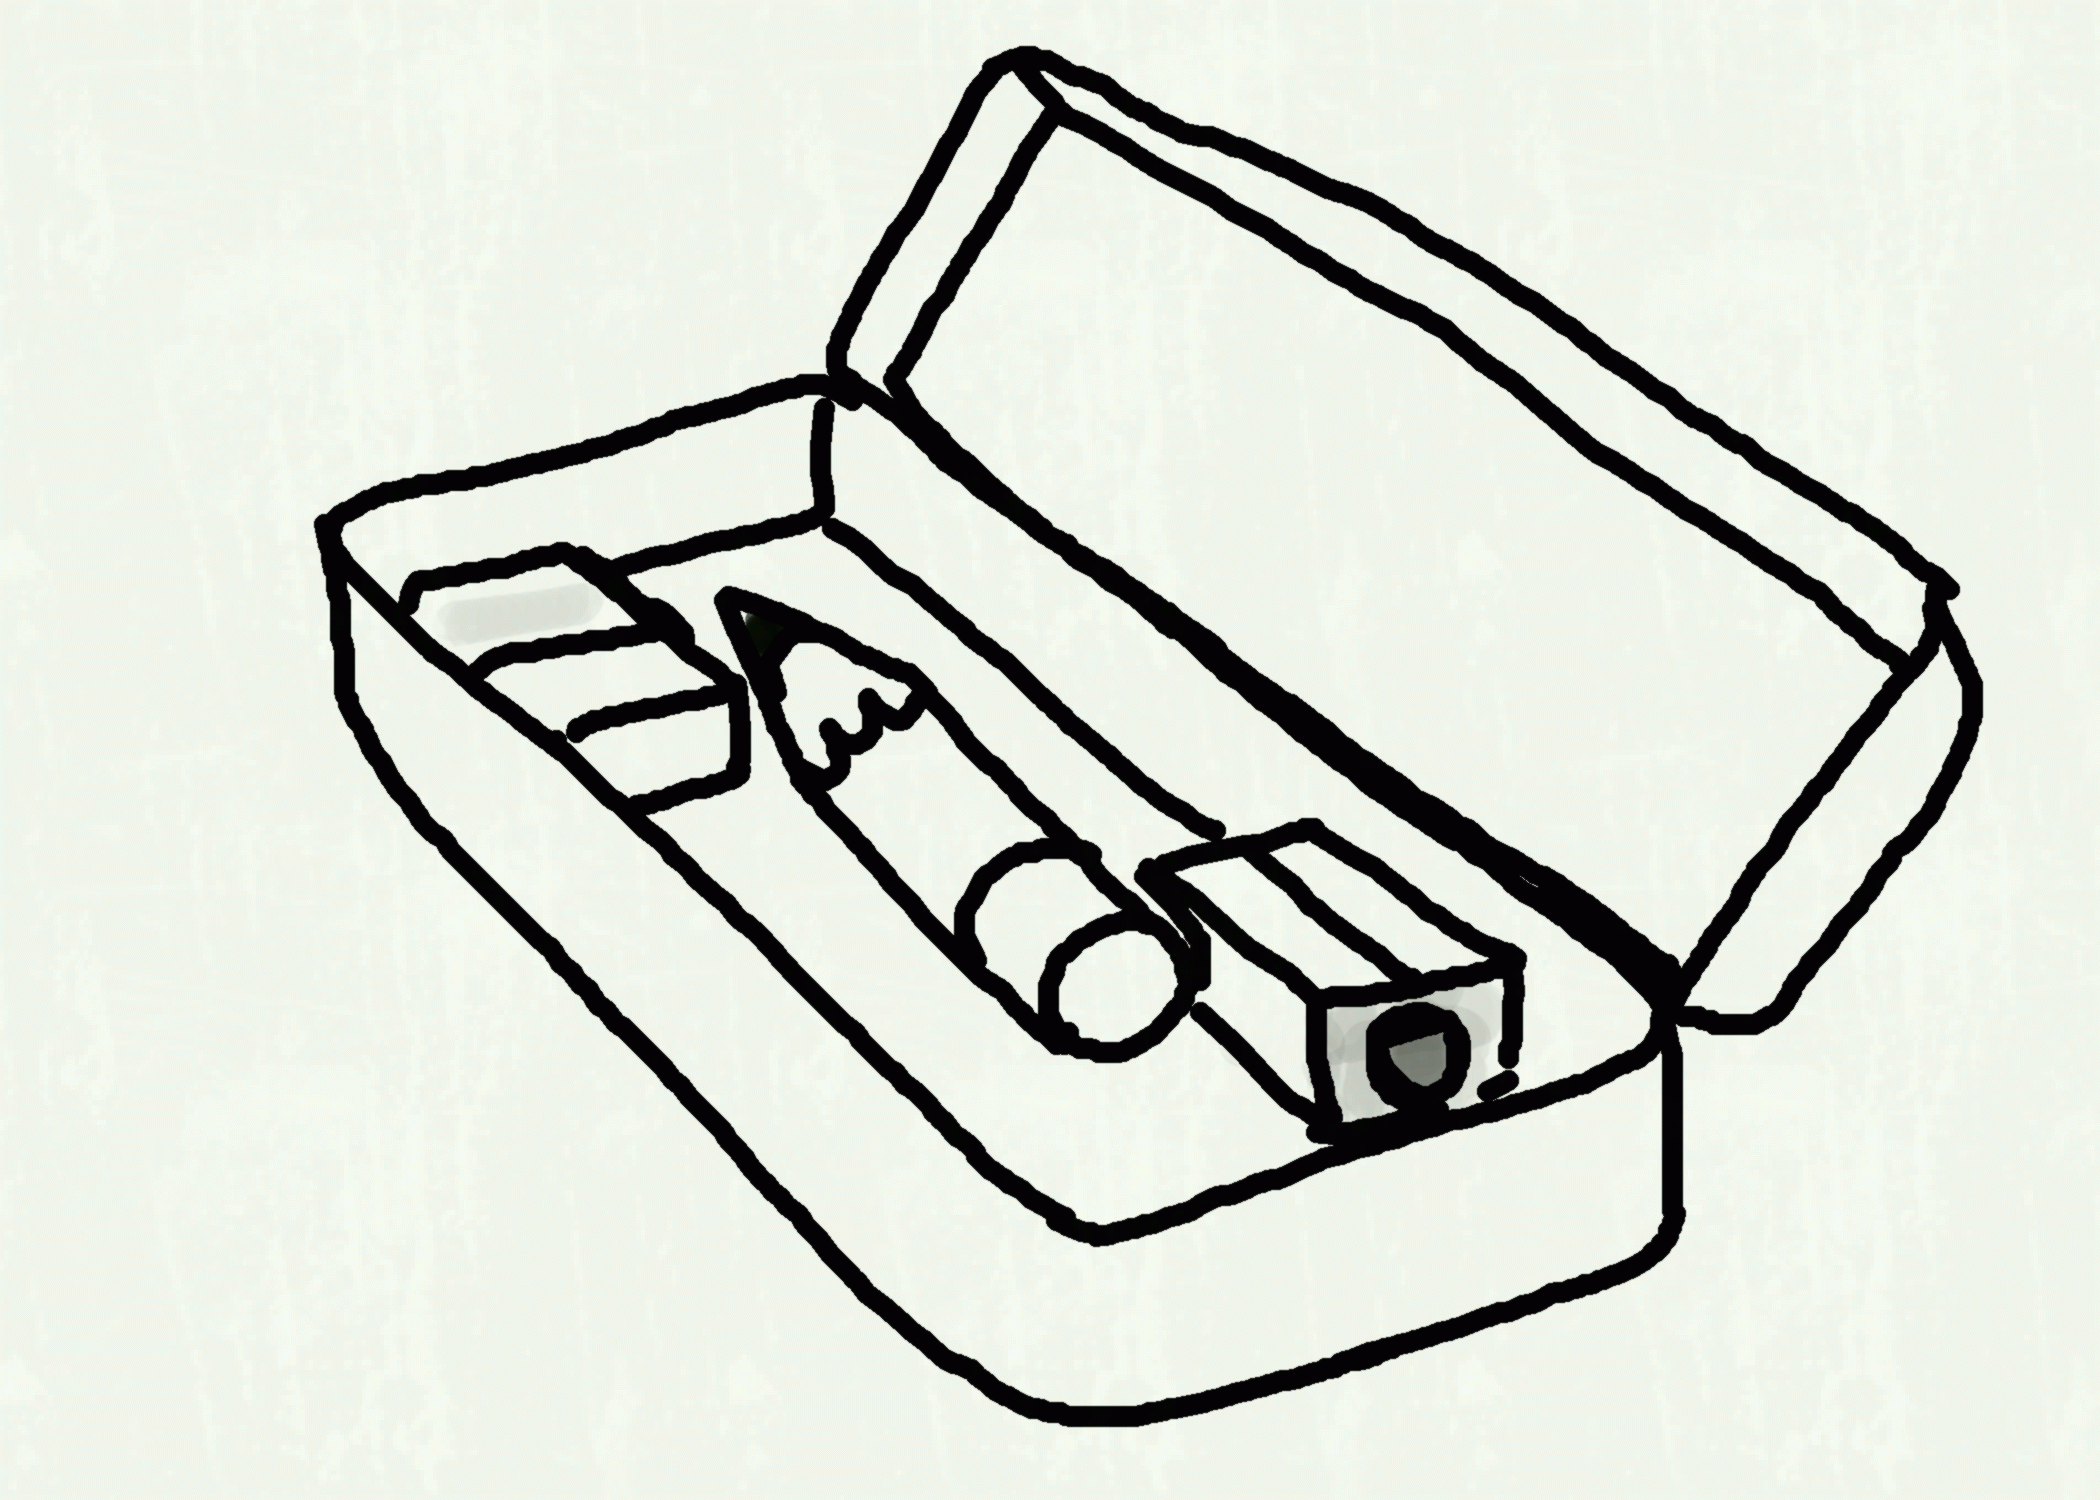 pencil case Pencil sharpener clipart black and white great free clipart gif